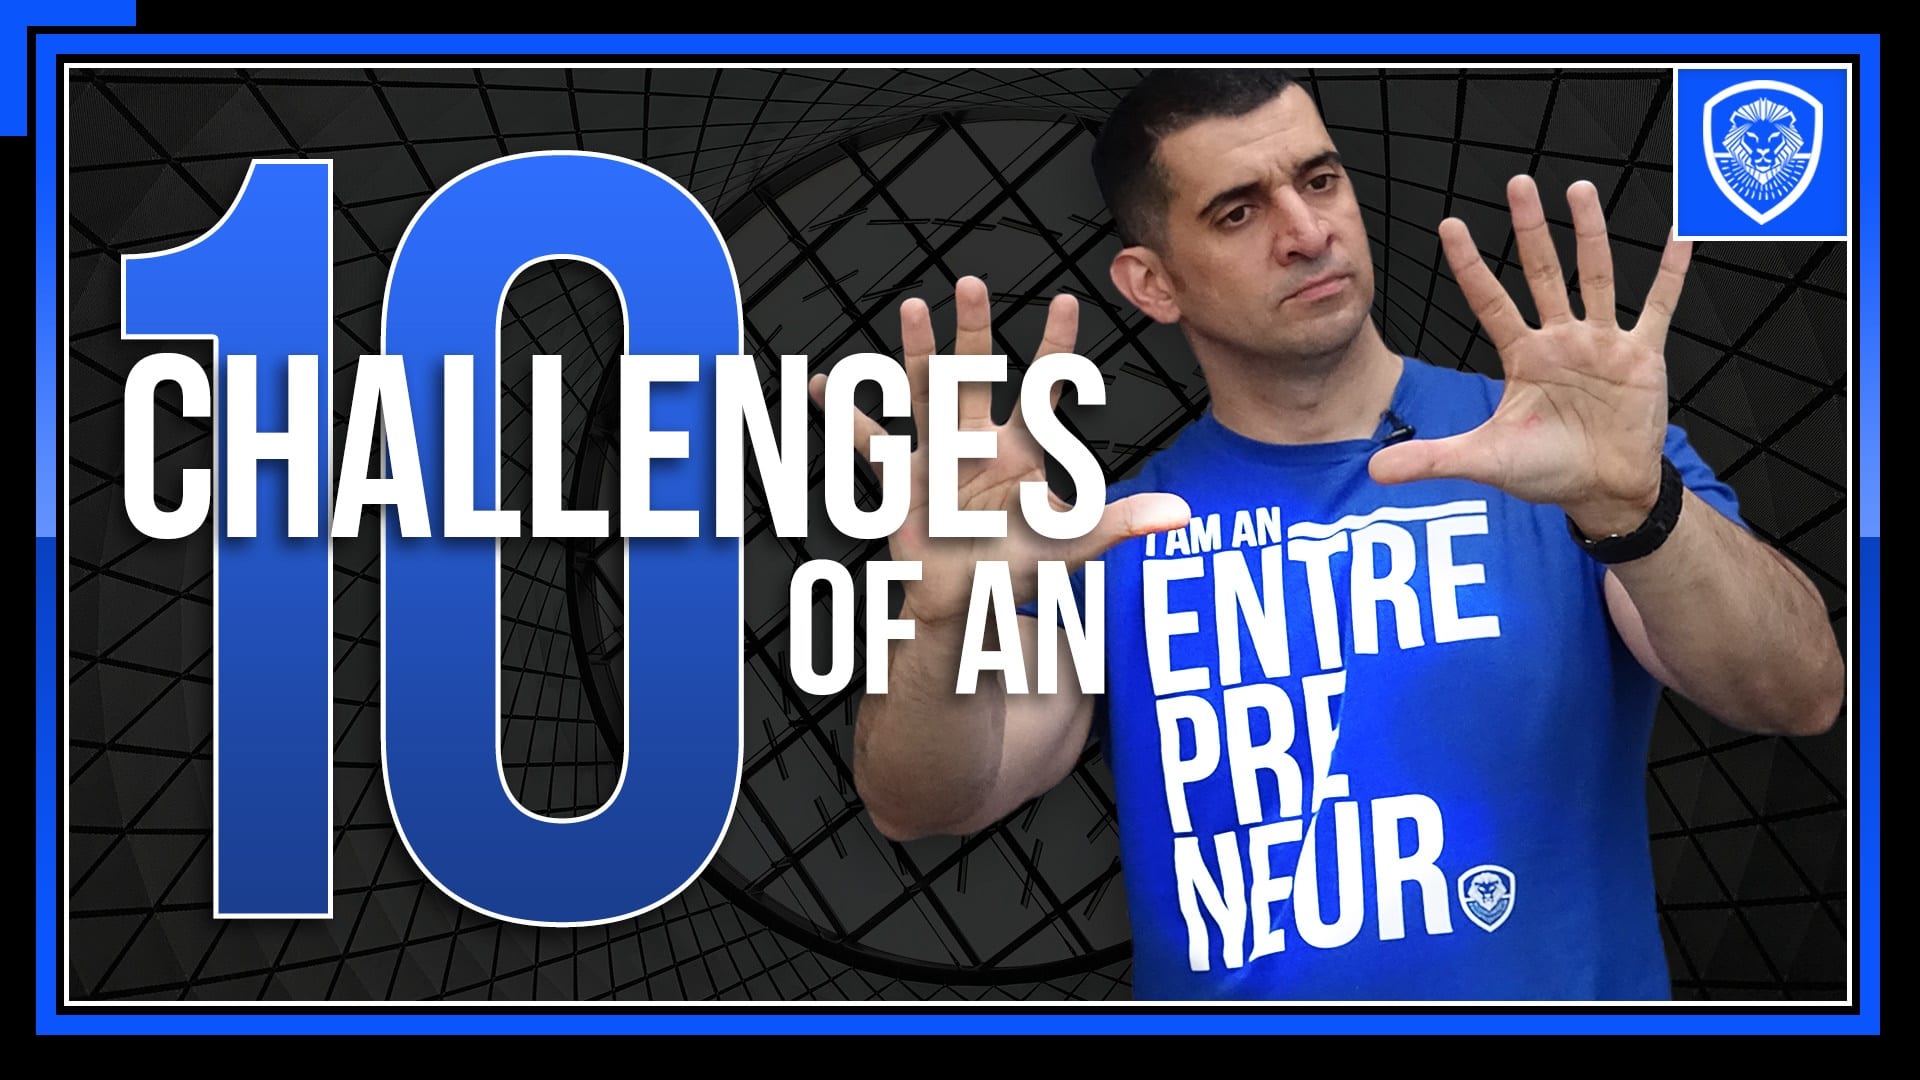 When you know what challenges you'll encounter, you have an edge. So in this video and article are the 10 challenges every entrepreneur will face.